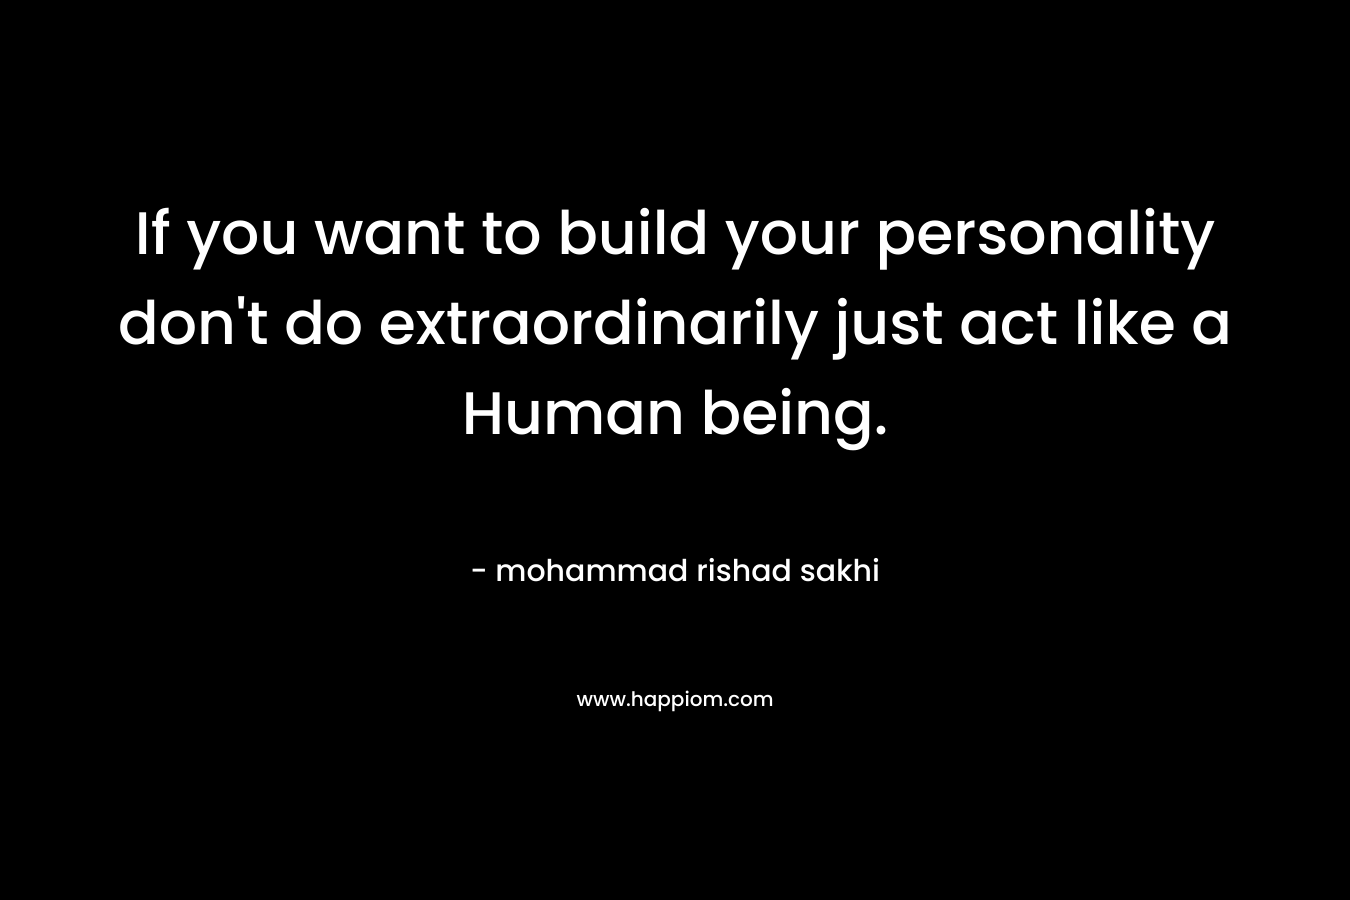 If you want to build your personality don't do extraordinarily just act like a Human being.